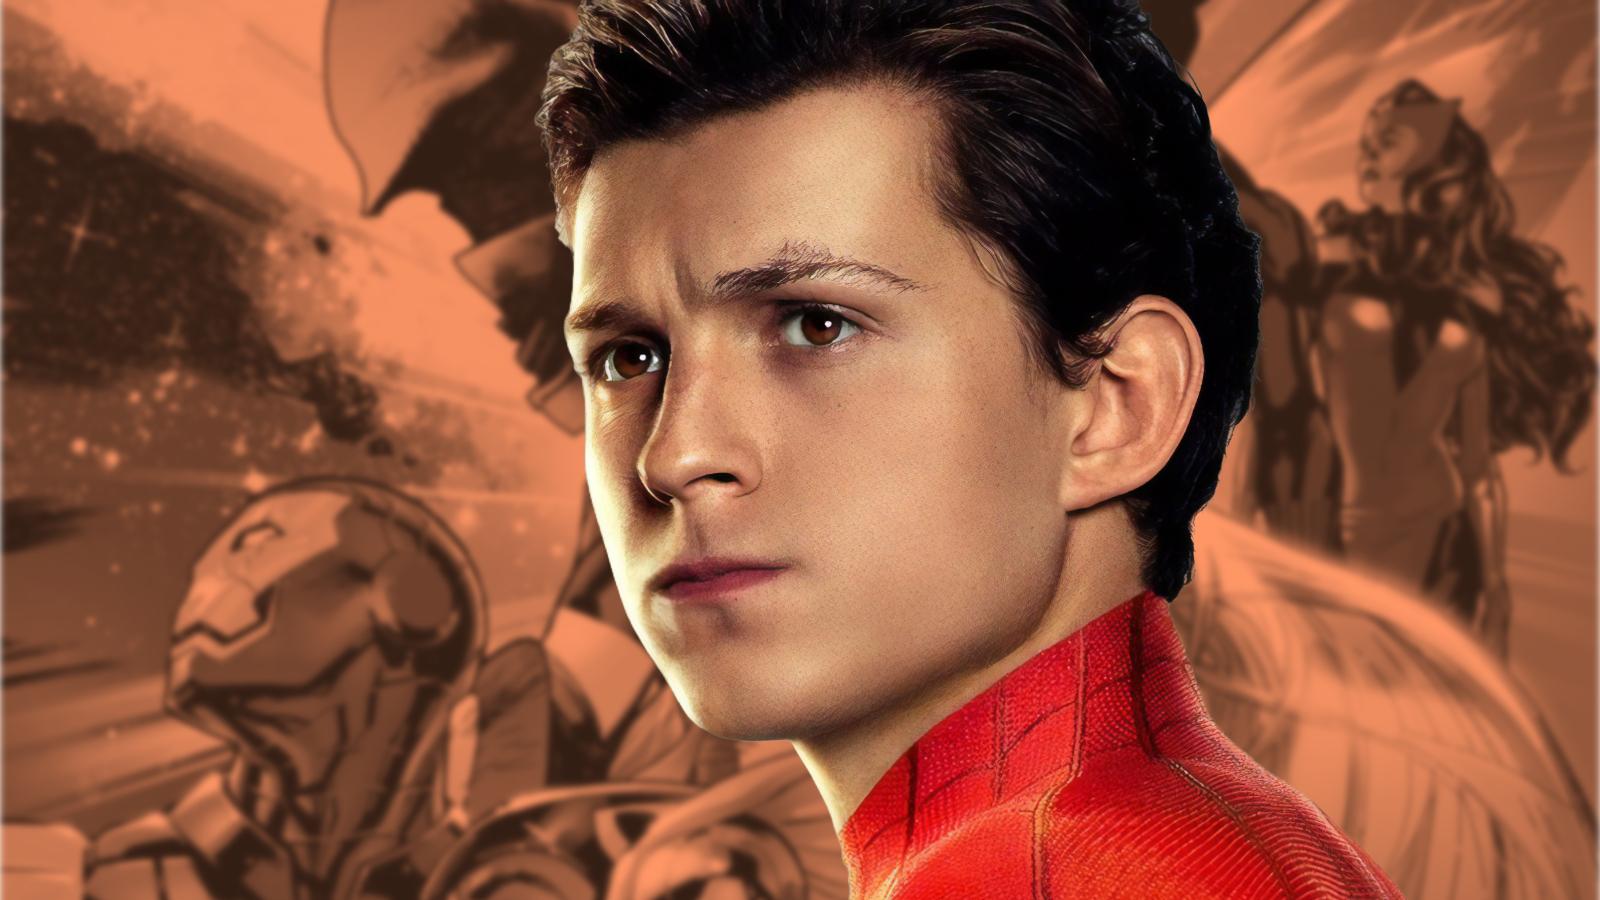 Tom Holland as Peter Parker/Spider-Man in front of an Avengers comic panel.